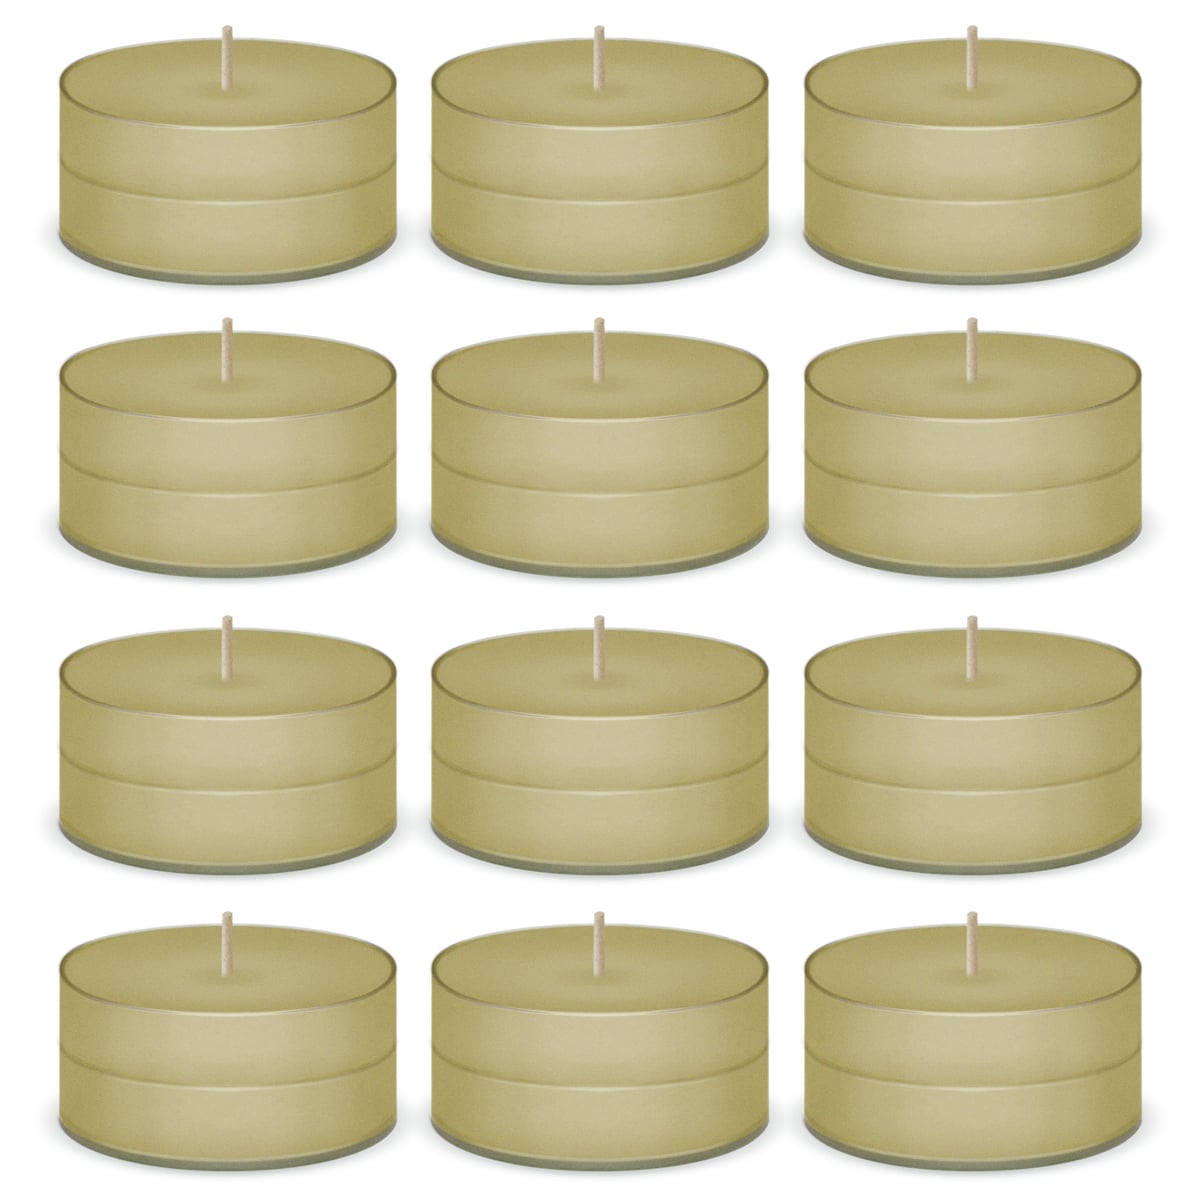 Almond Scented Tea Lights Candles by American Candle - 12 Pack